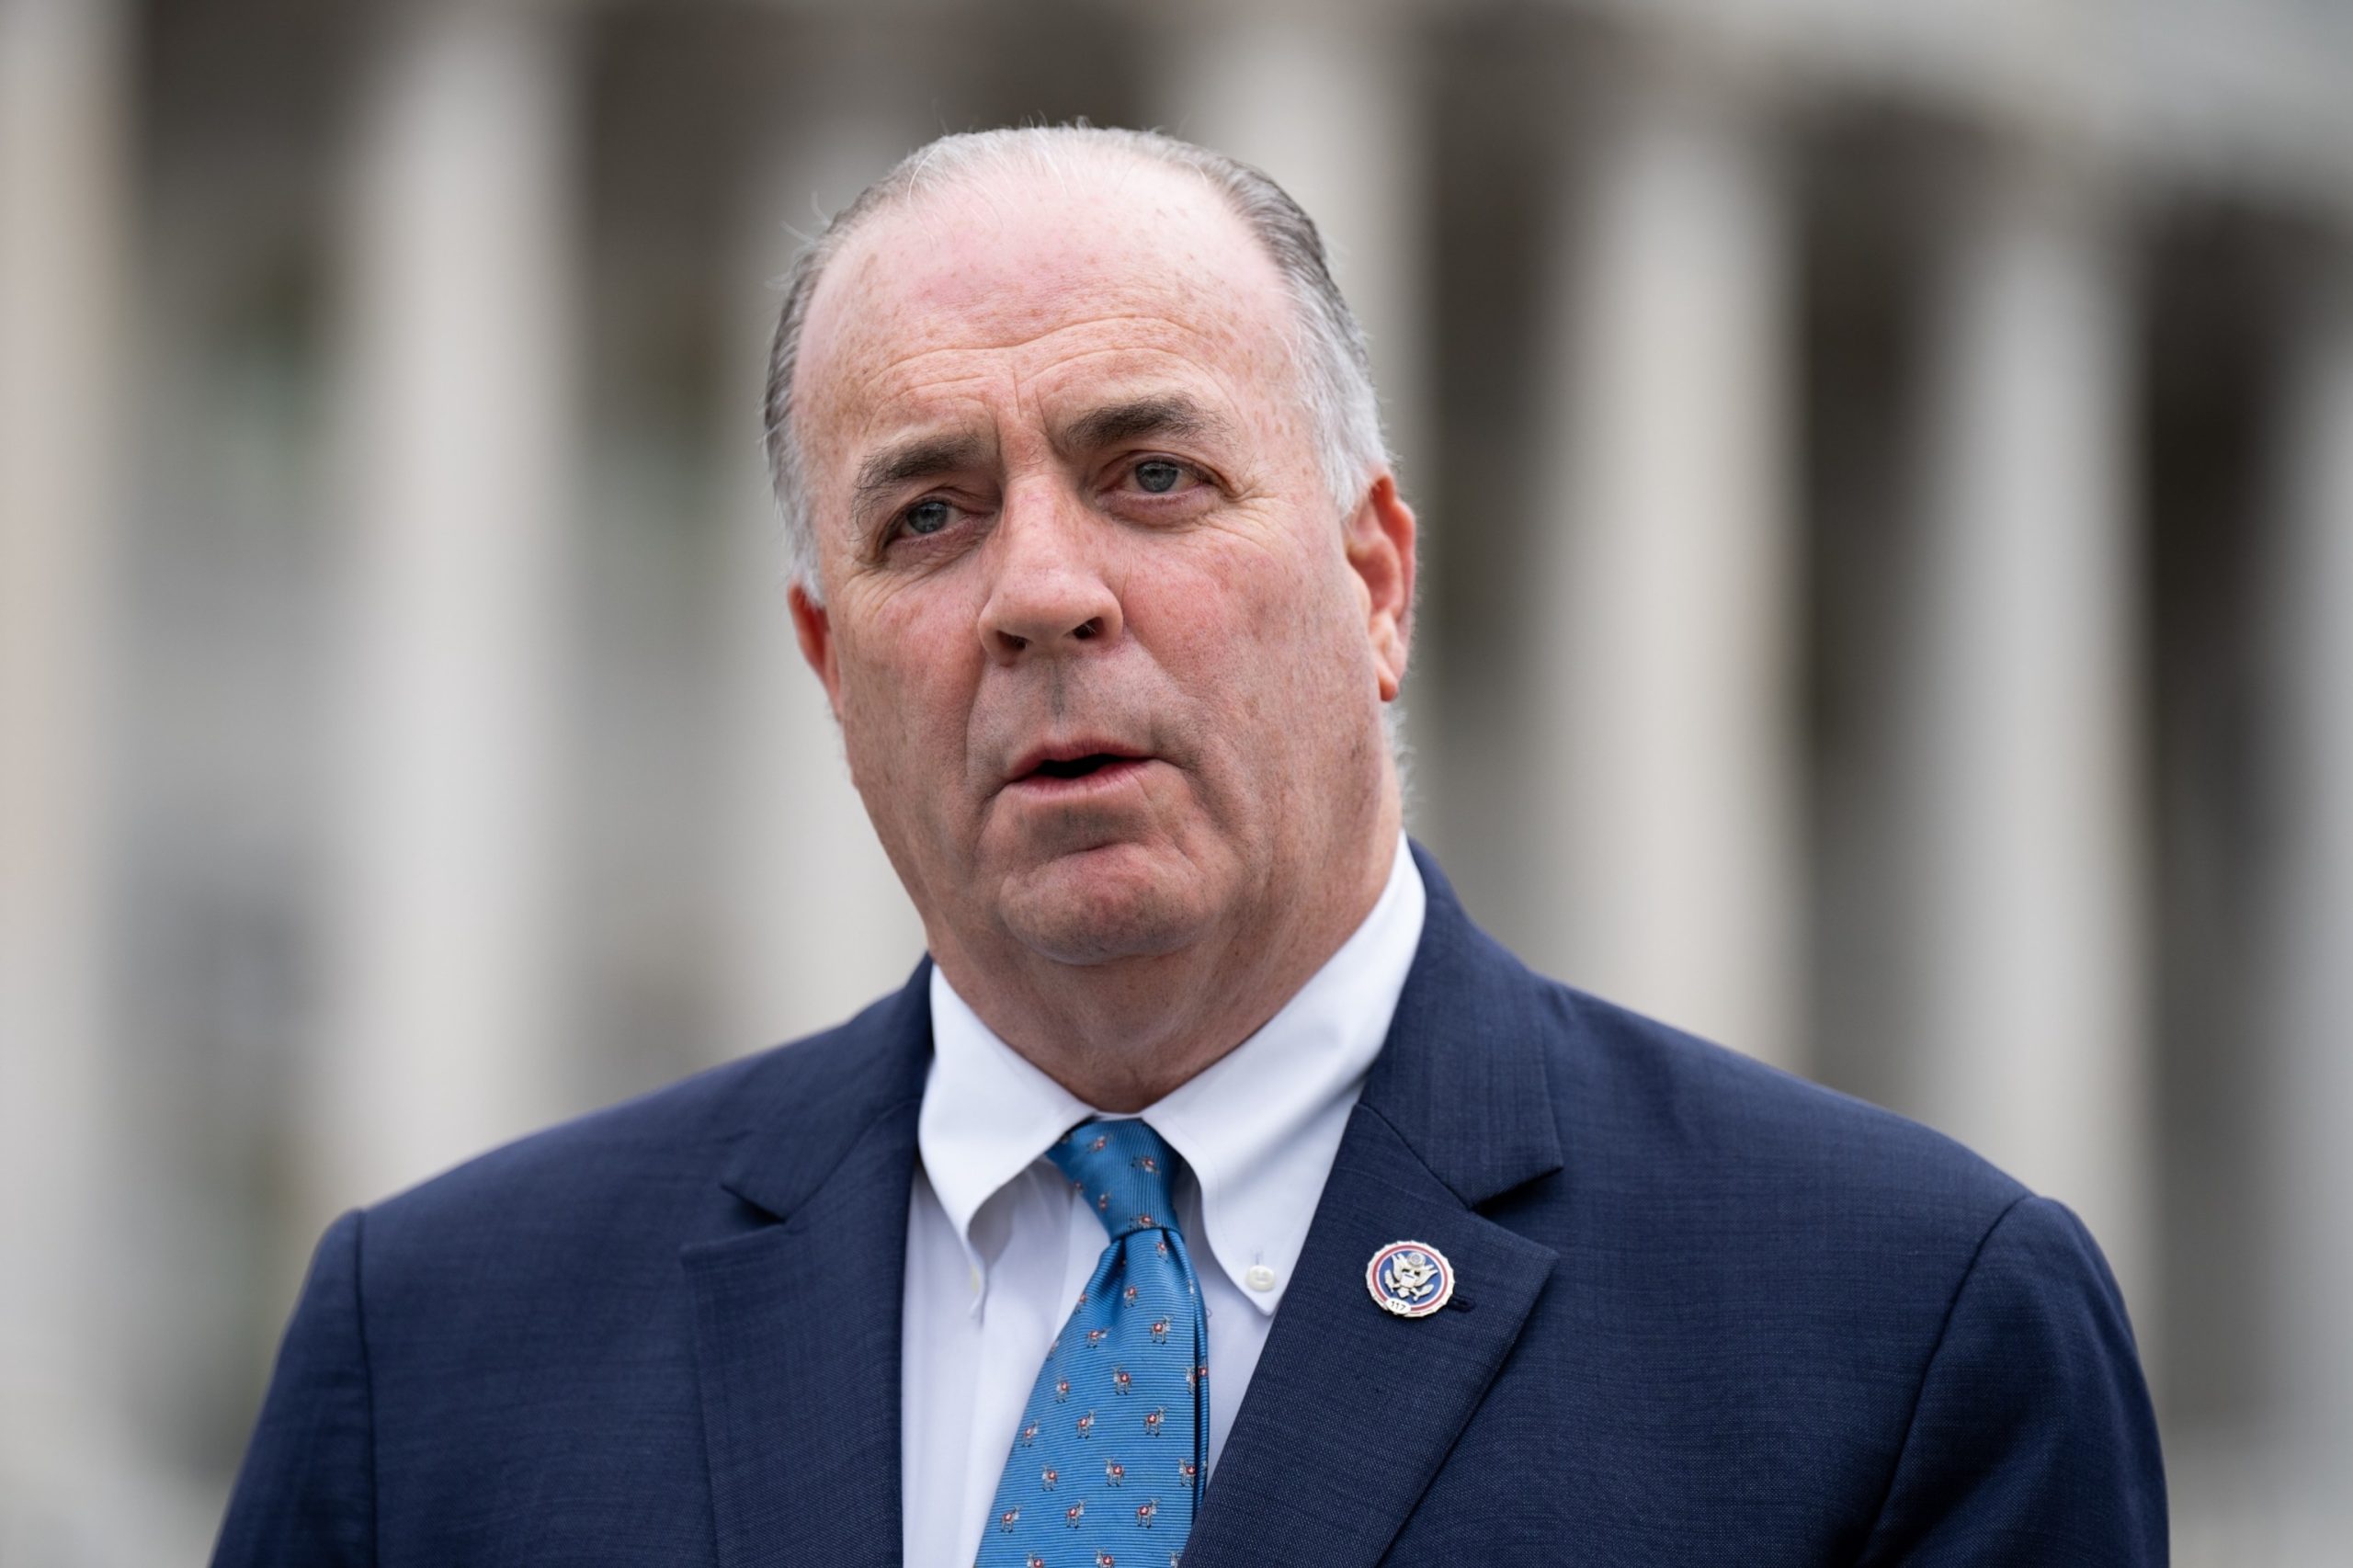 Sheriff confirms Michigan Representative Dan Kildee's brother was killed in a shooting incident